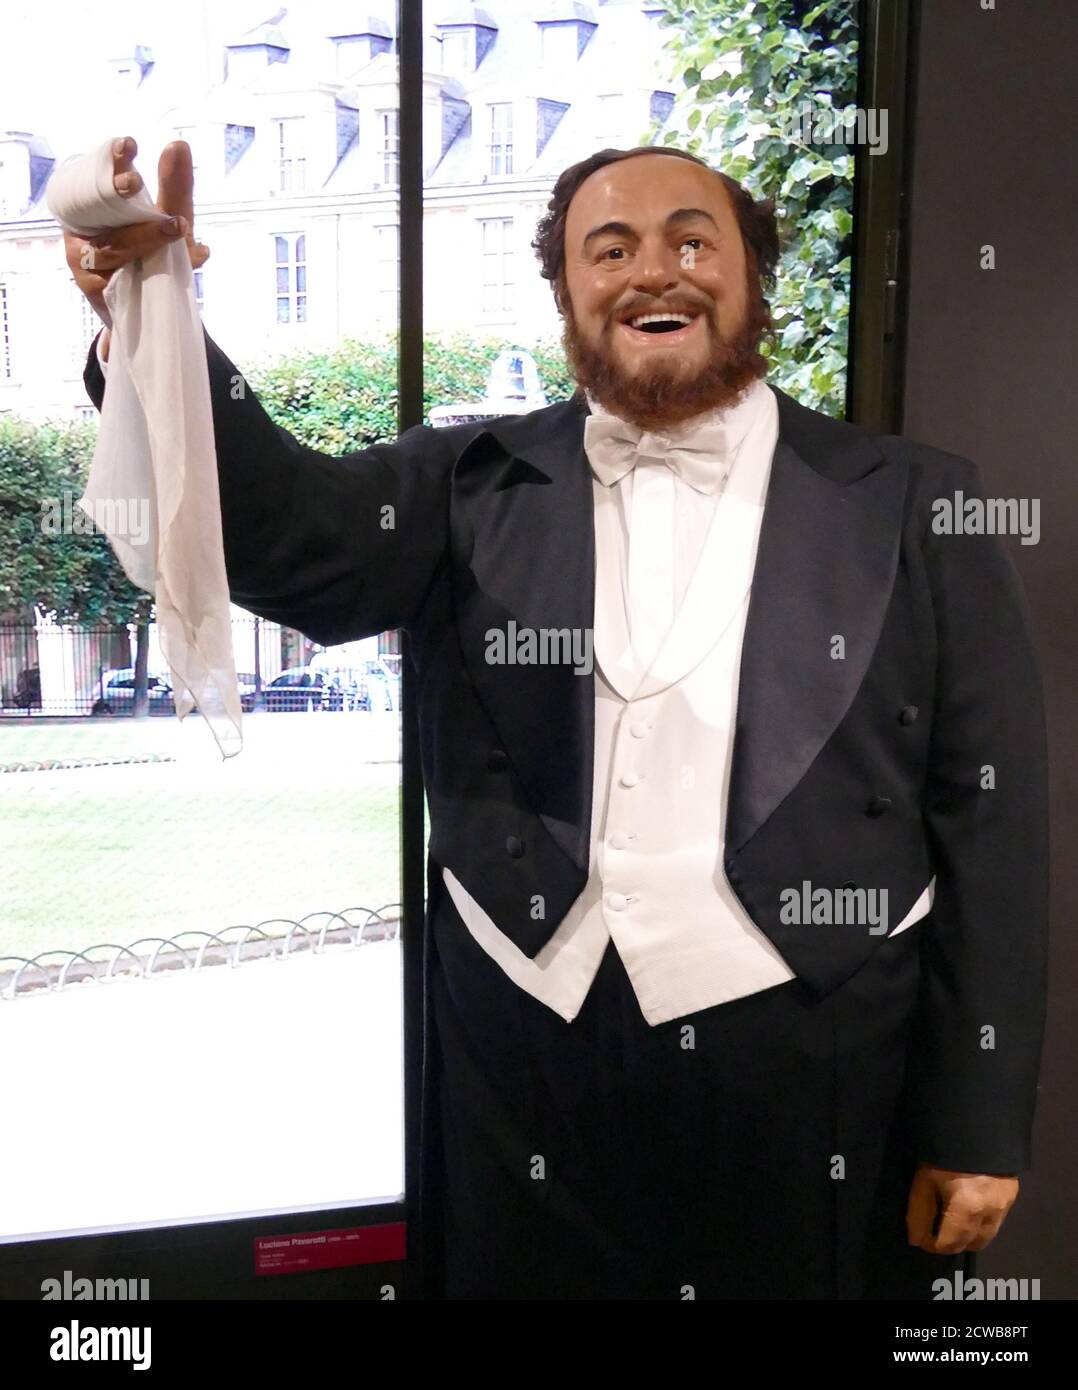 Waxwork statue of Luciano Pavarotti (1935 - 2007), Italian operatic tenor who also crossed over into popular music, eventually becoming one of the most commercially successful tenors of all time Stock Photo